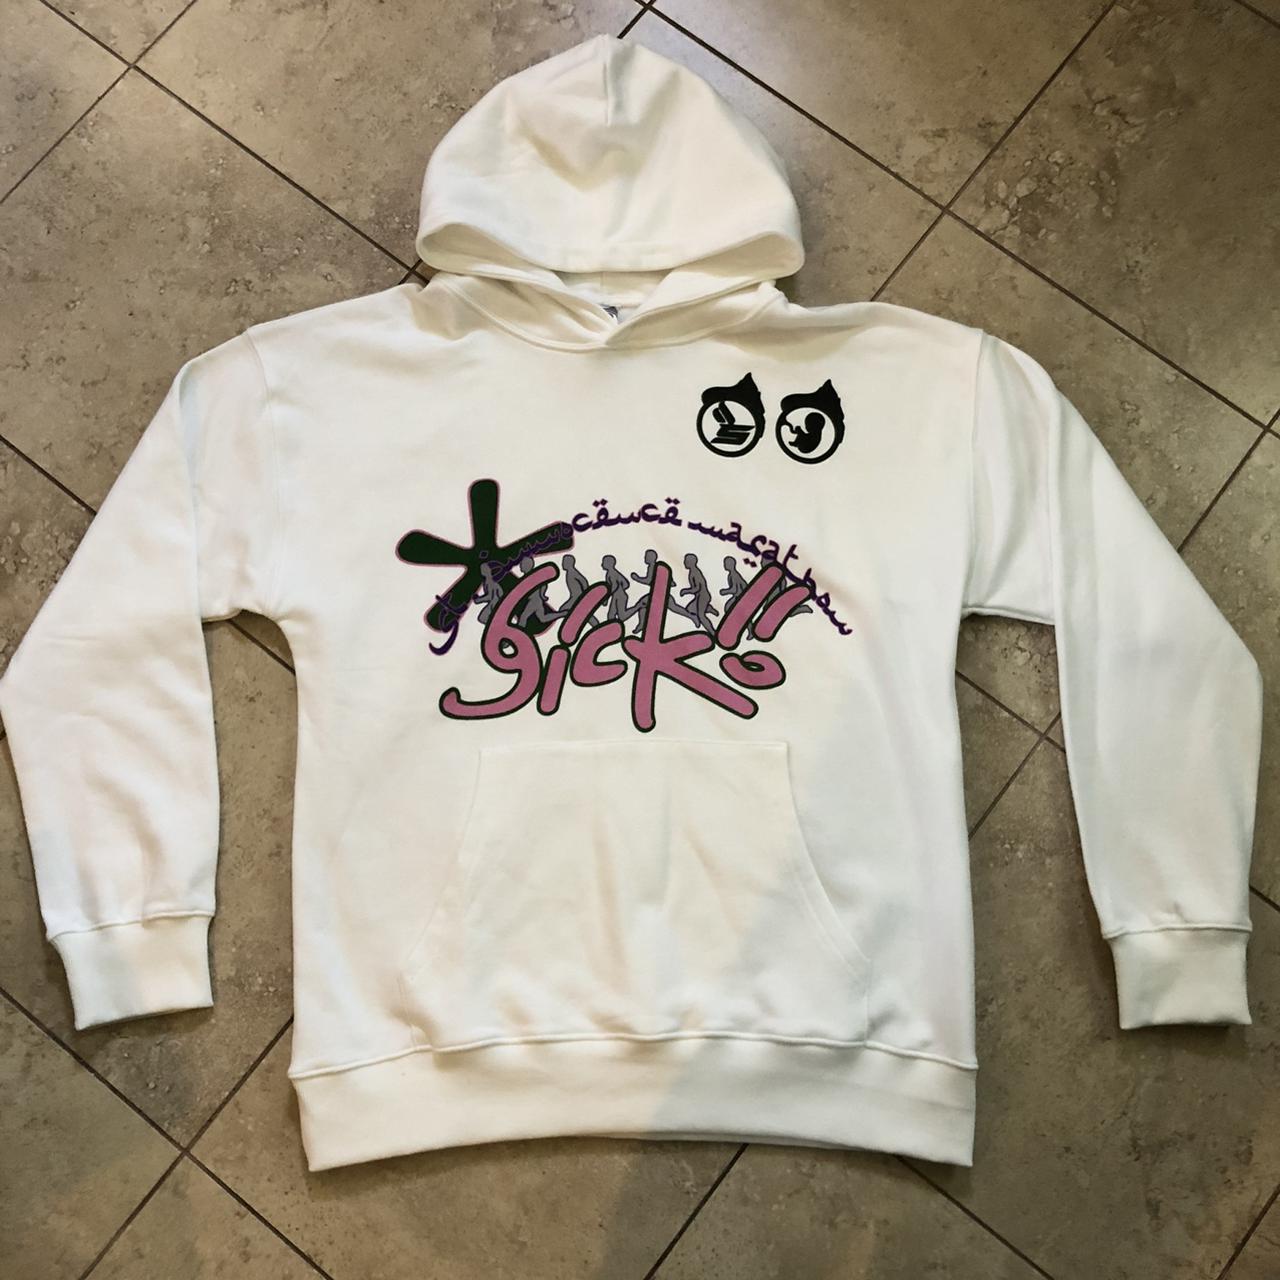 Sicko Amhurst Hoodie, Size Large, Barely worn great...